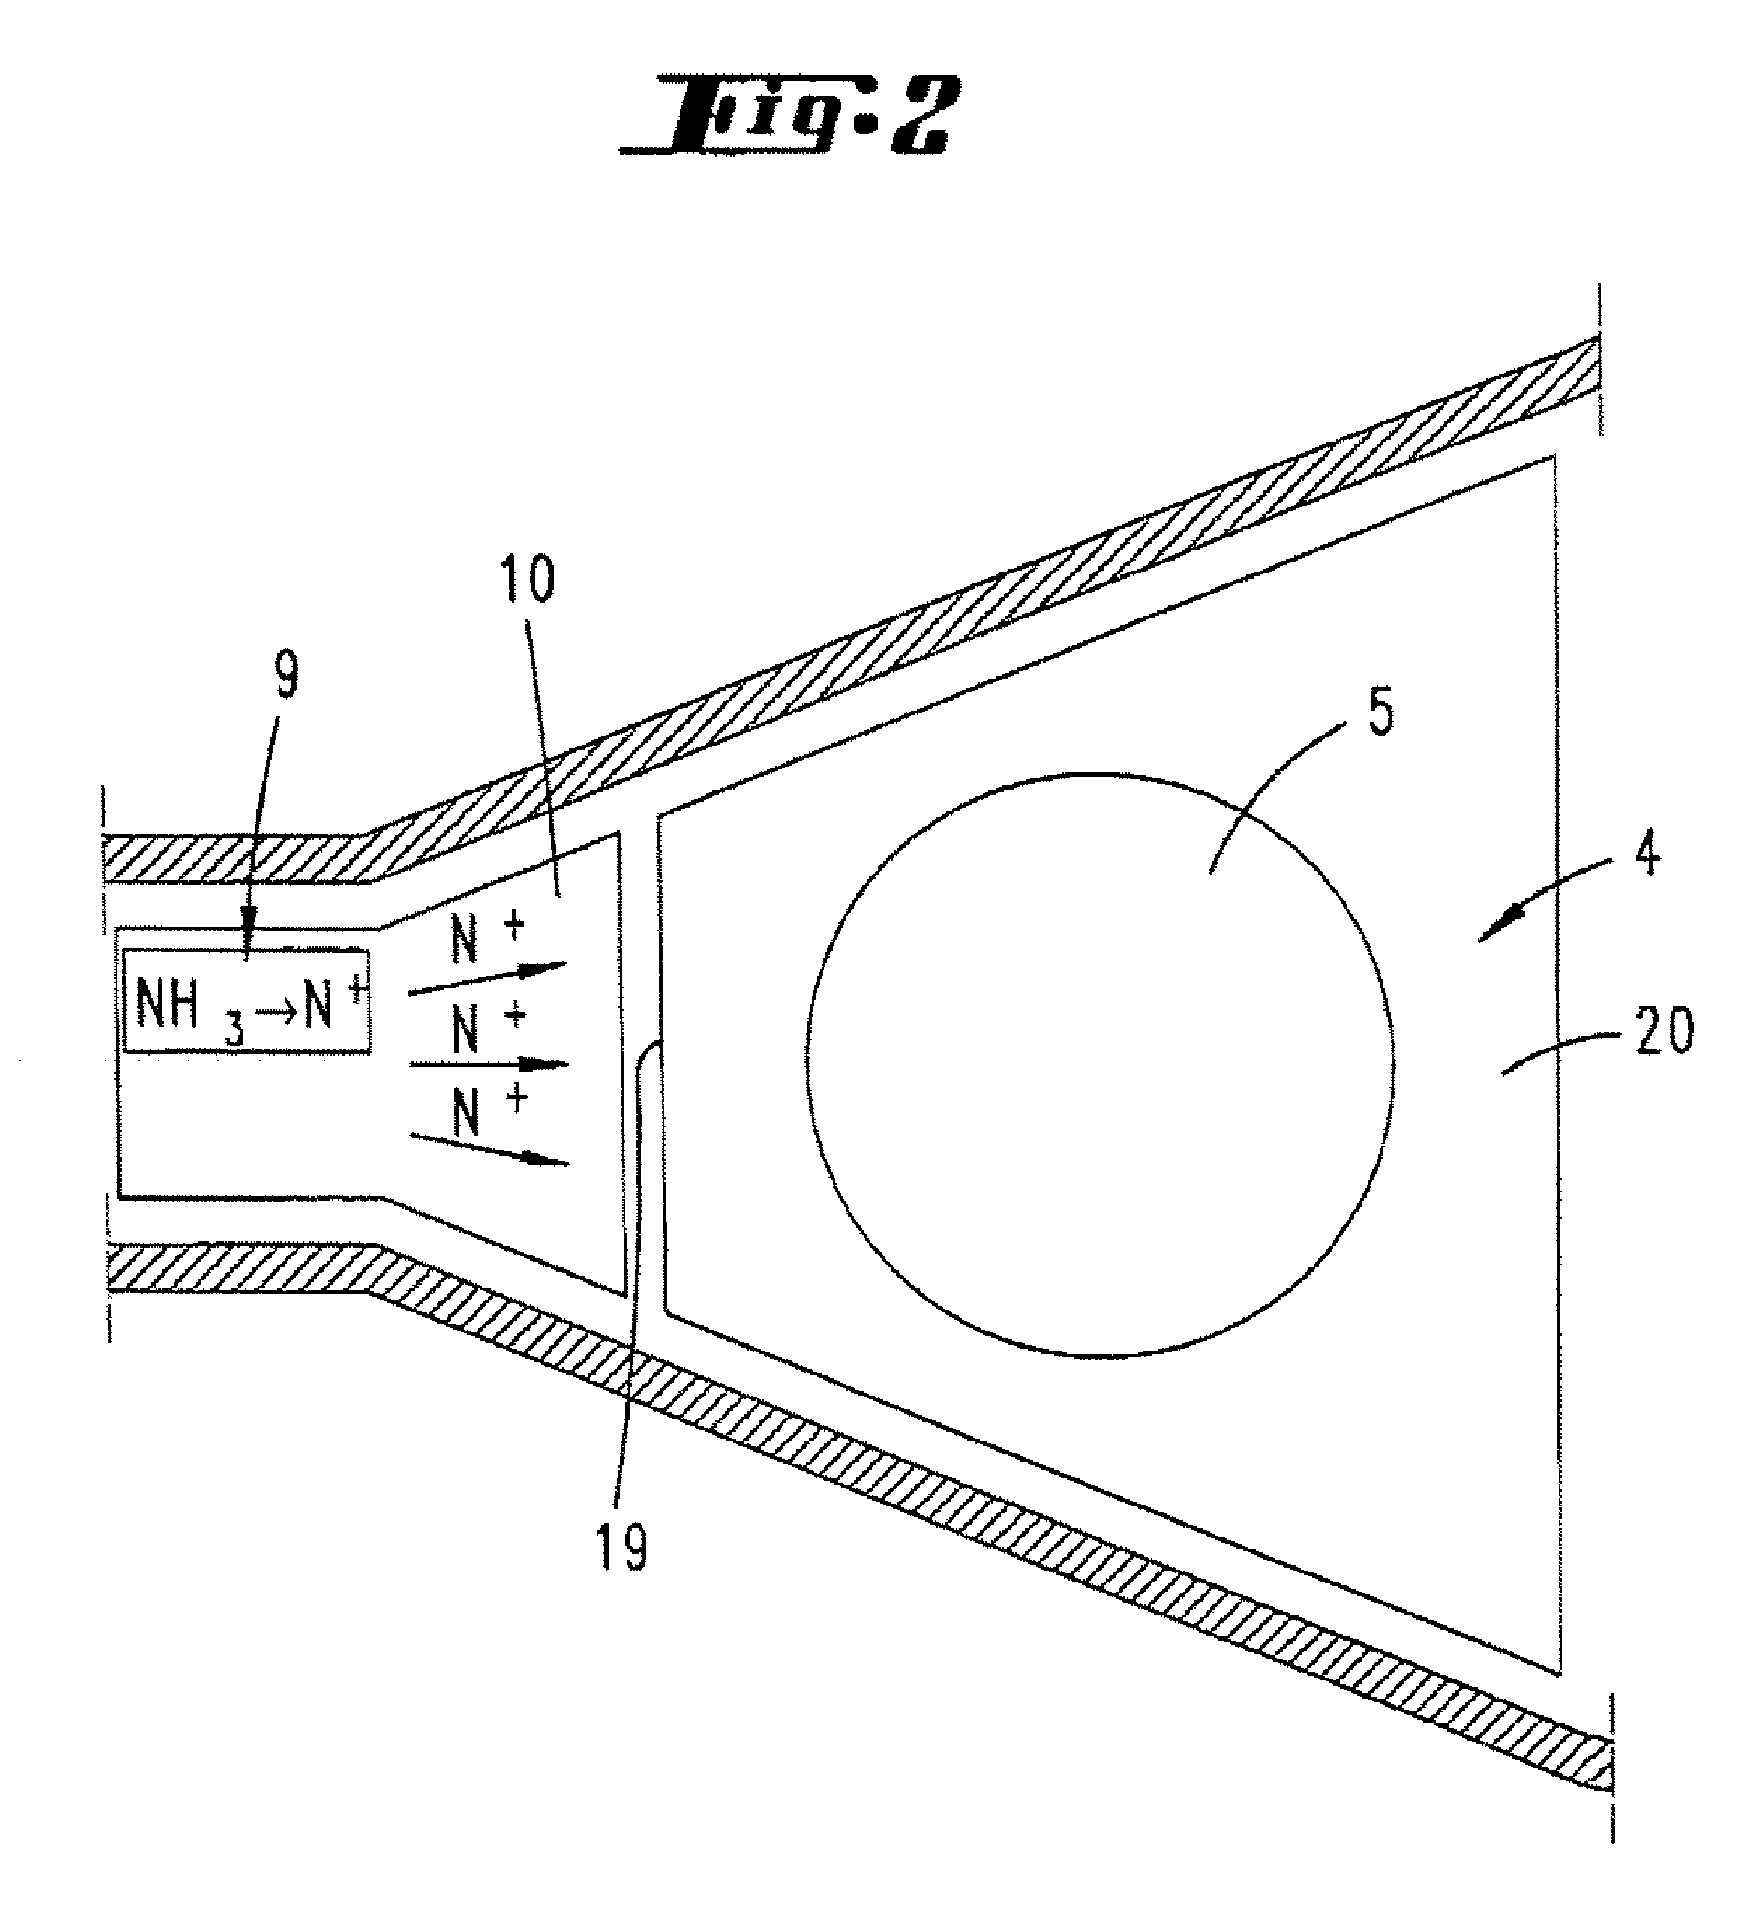 Process And Apparatus For Depositing Semiconductor Layers Using Two Process Gases, One Of Which is Preconditioned